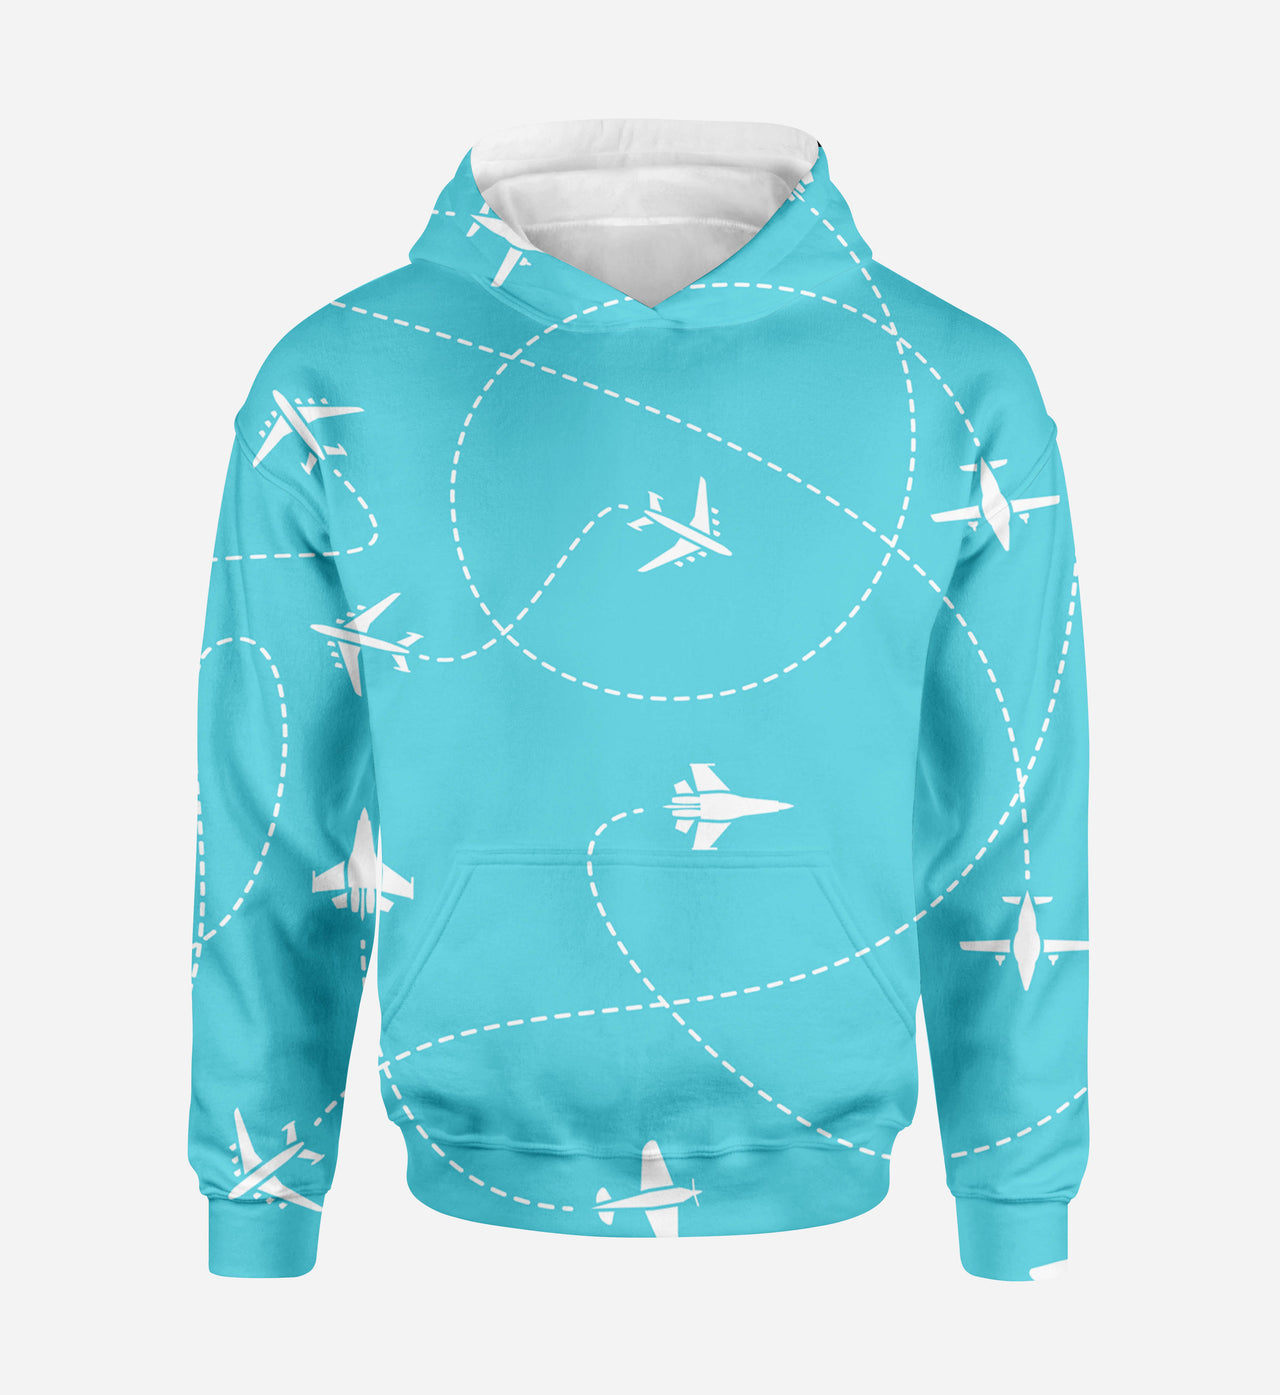 Travel The World By Plane Printed 3D Hoodies